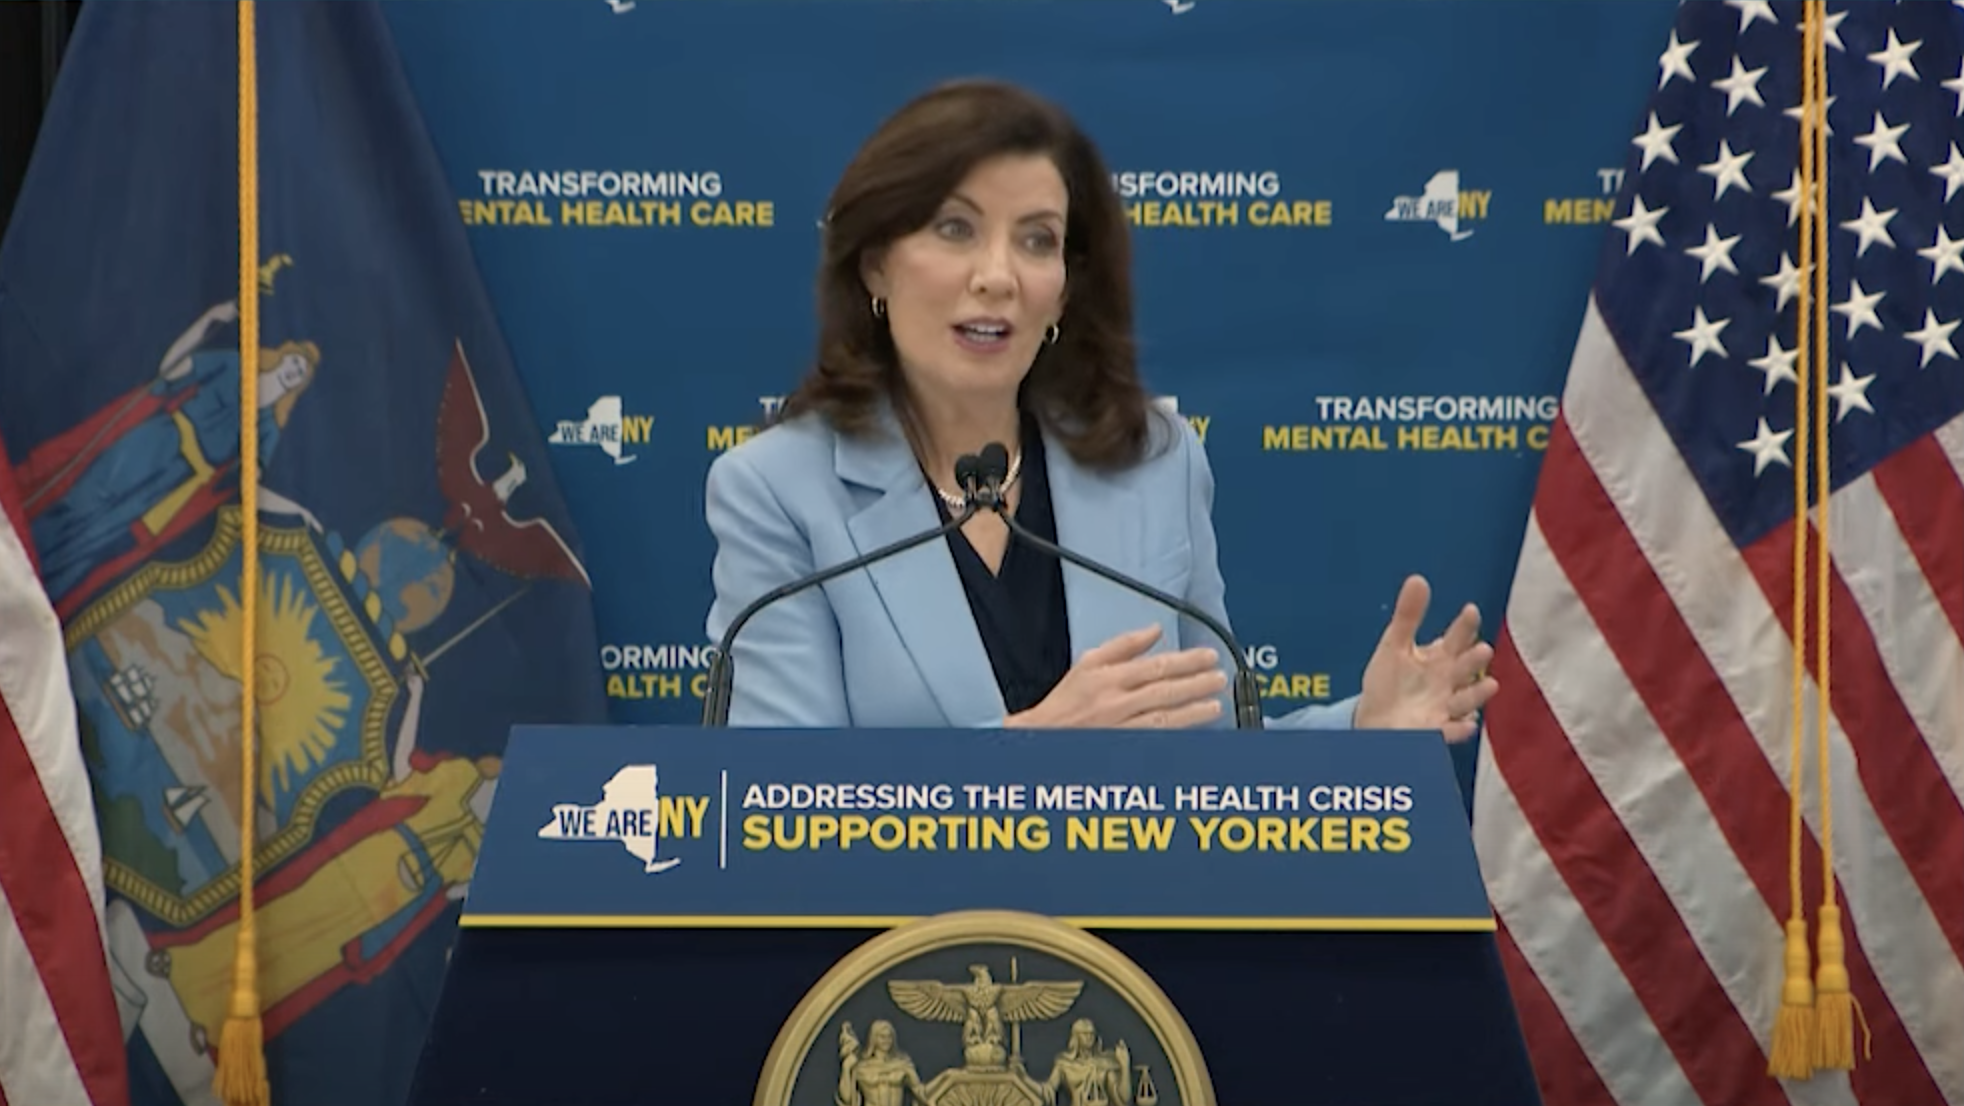 New York Vulnerable: A Look at the Governor’s New Mental Health Plan